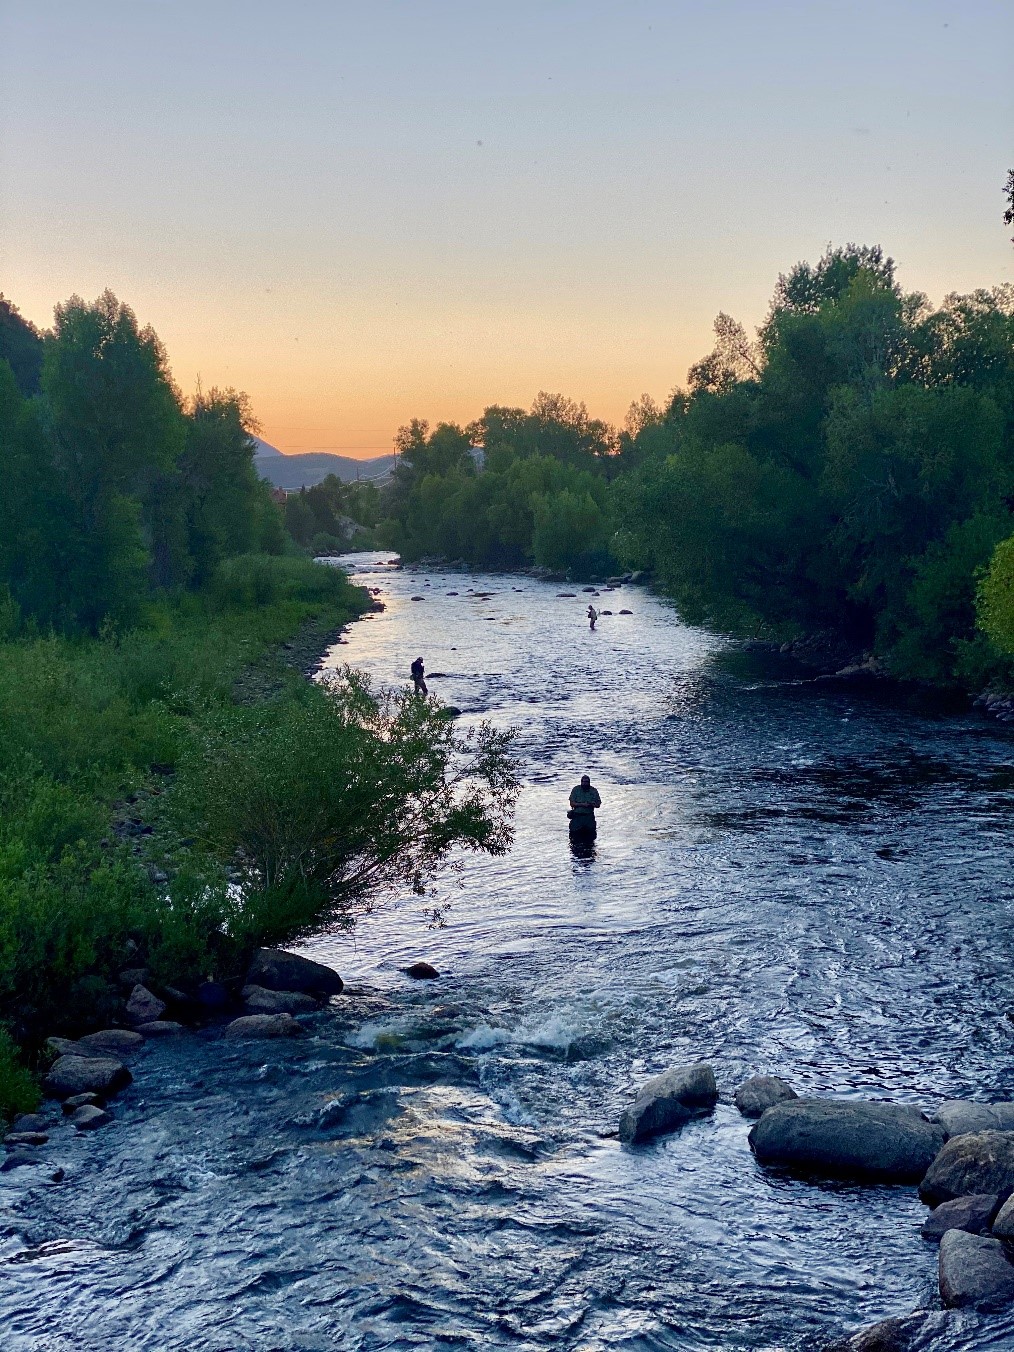 The Yampa River downtown Steamboat Springs July 2020 by Dana Dallavalle